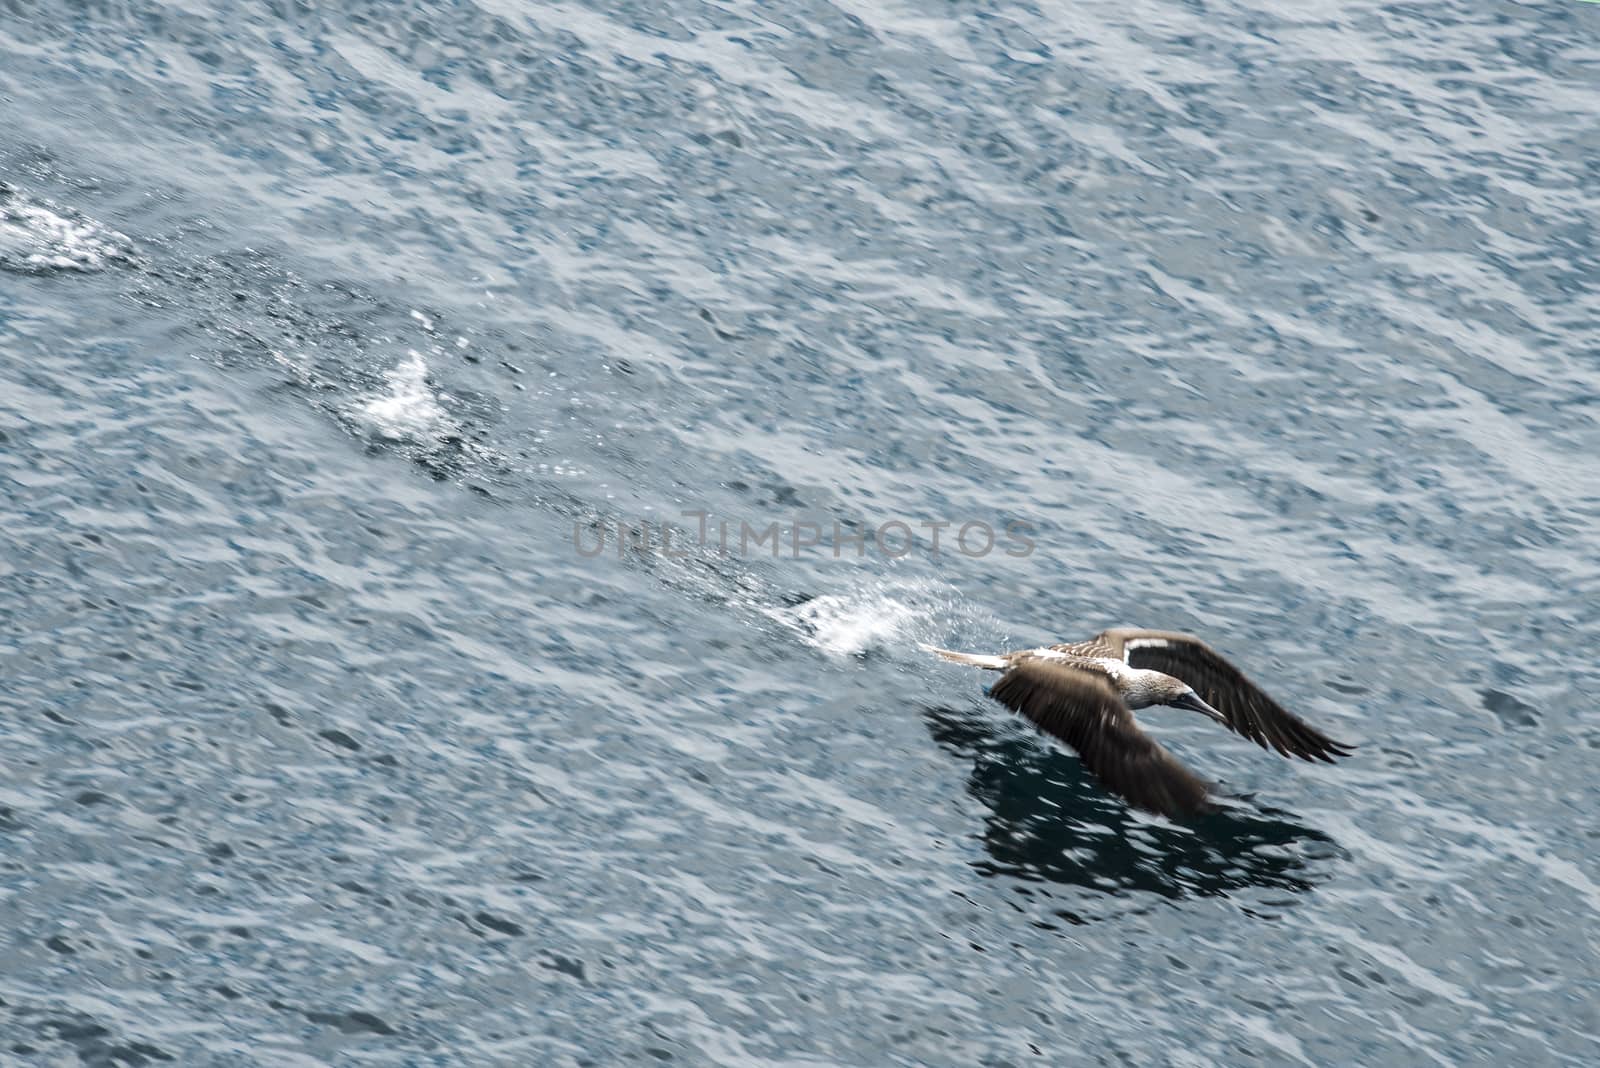 Blue-footed booby flying up from the water, San Cristobal,  Gala by xura